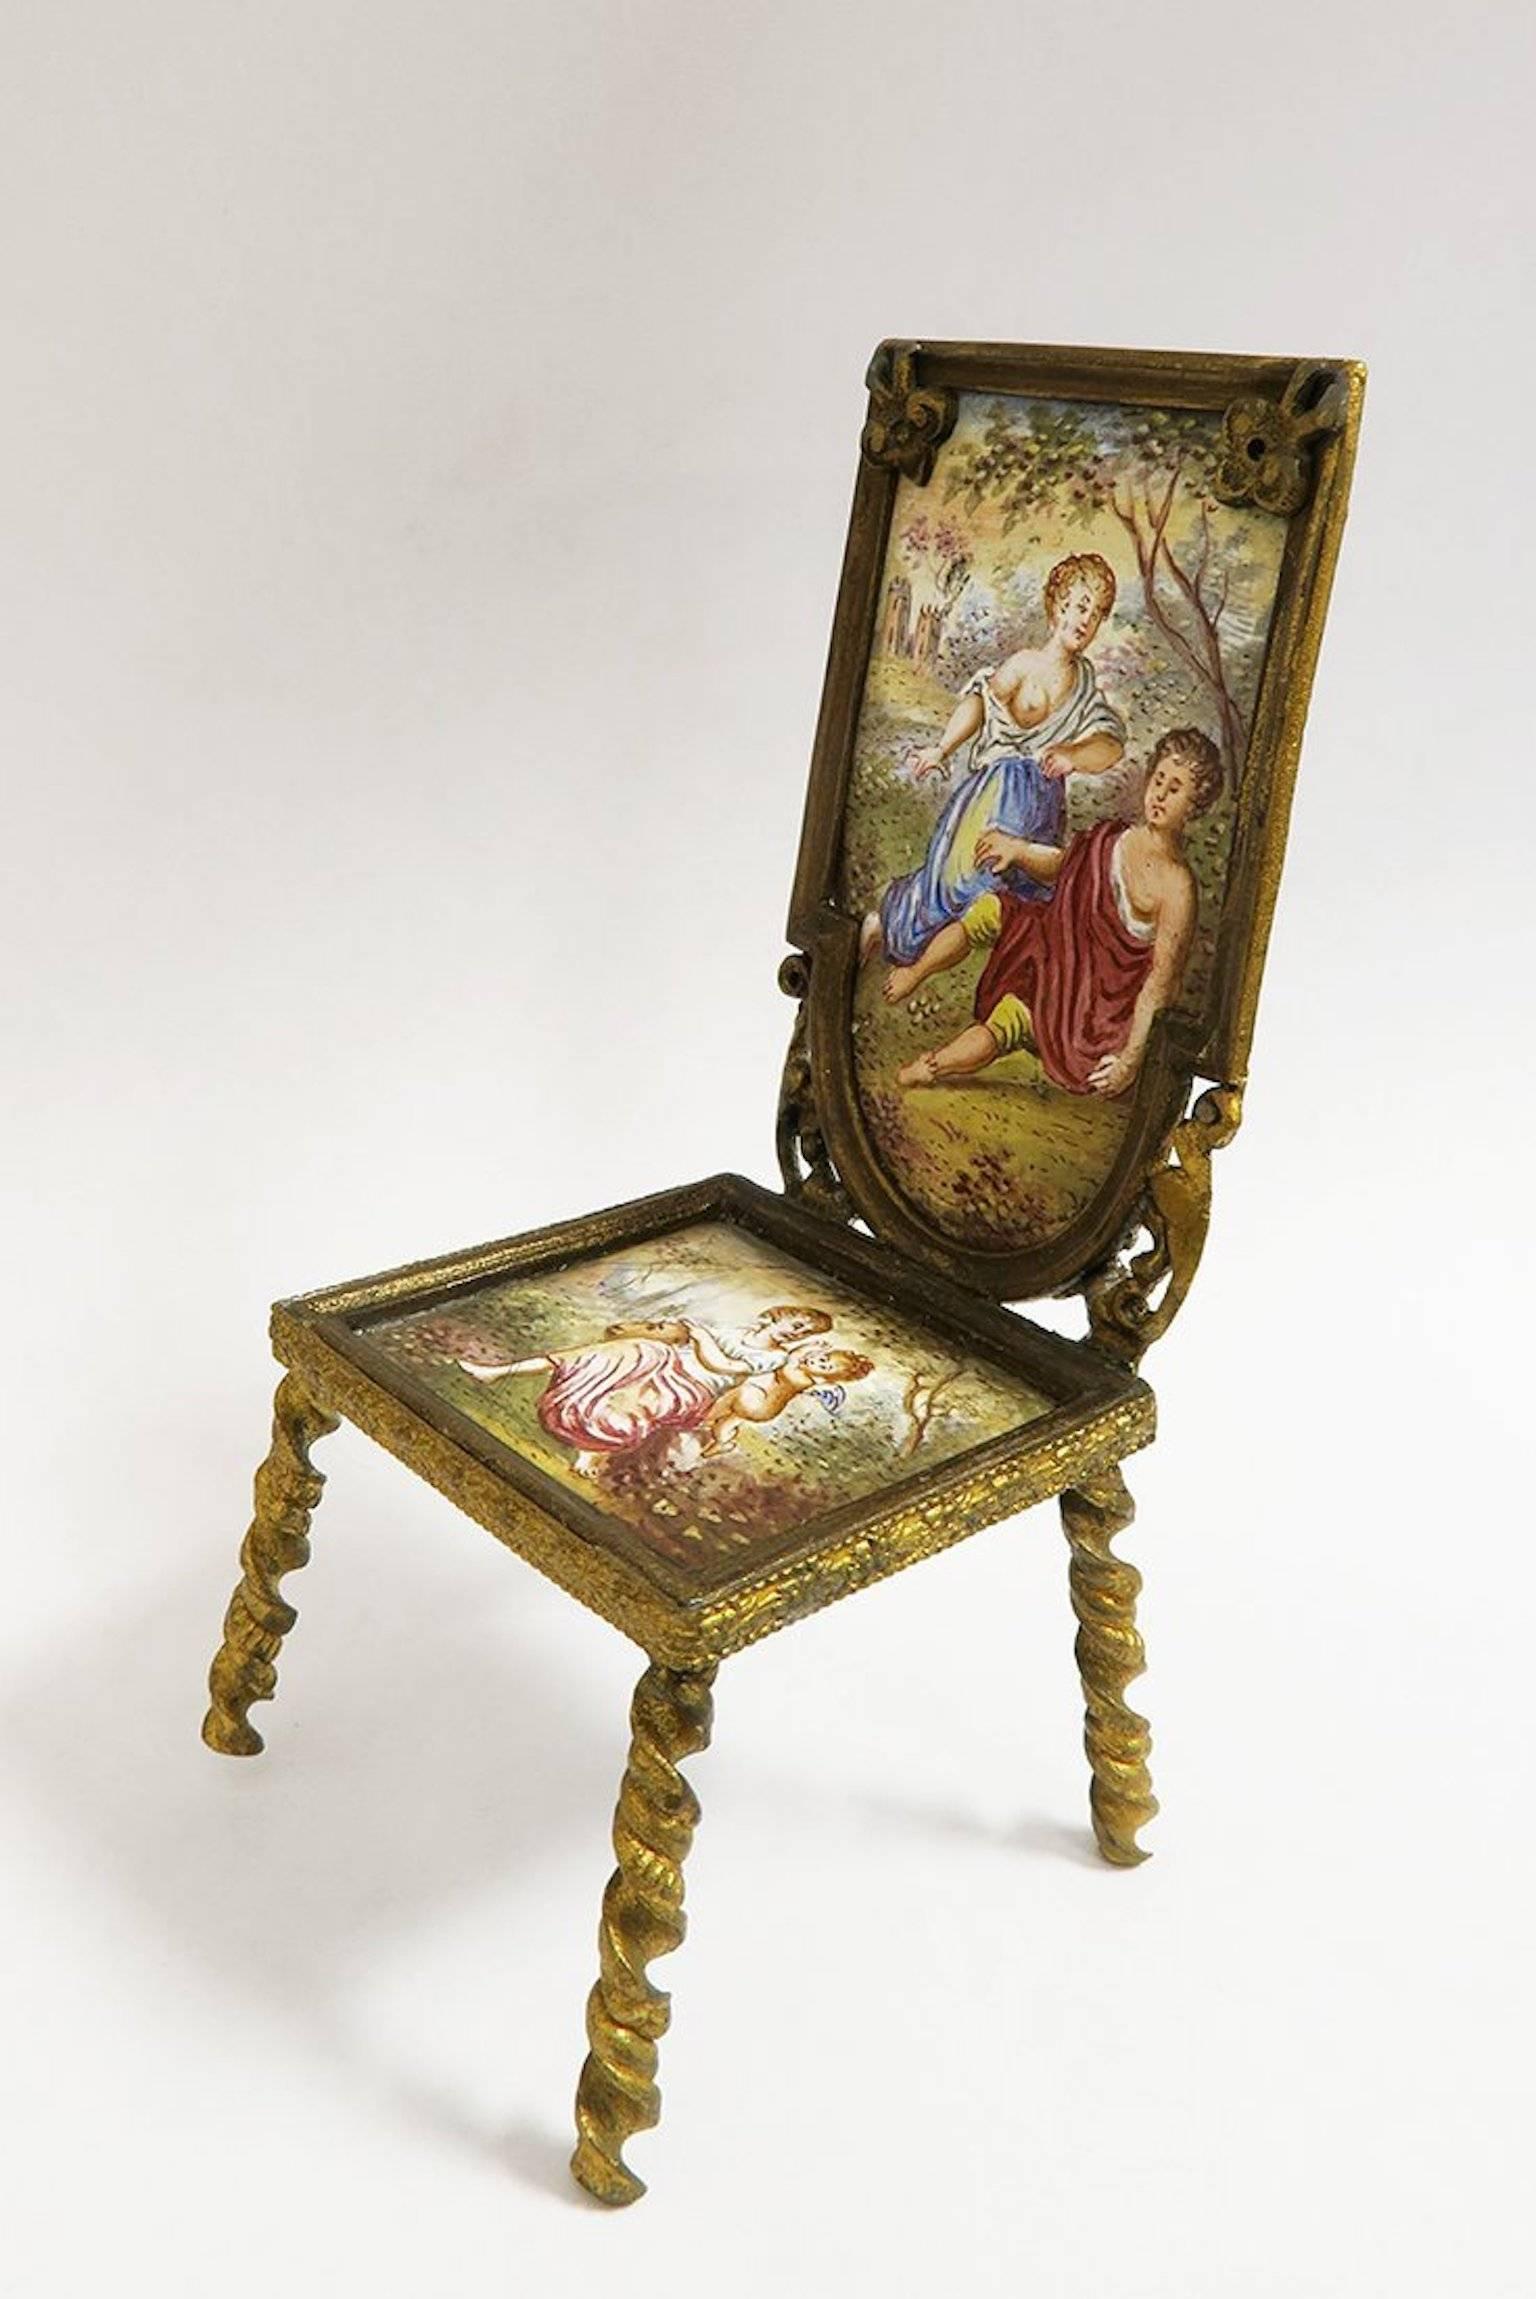 19th century Viennese enamel and bronze miniature chair.